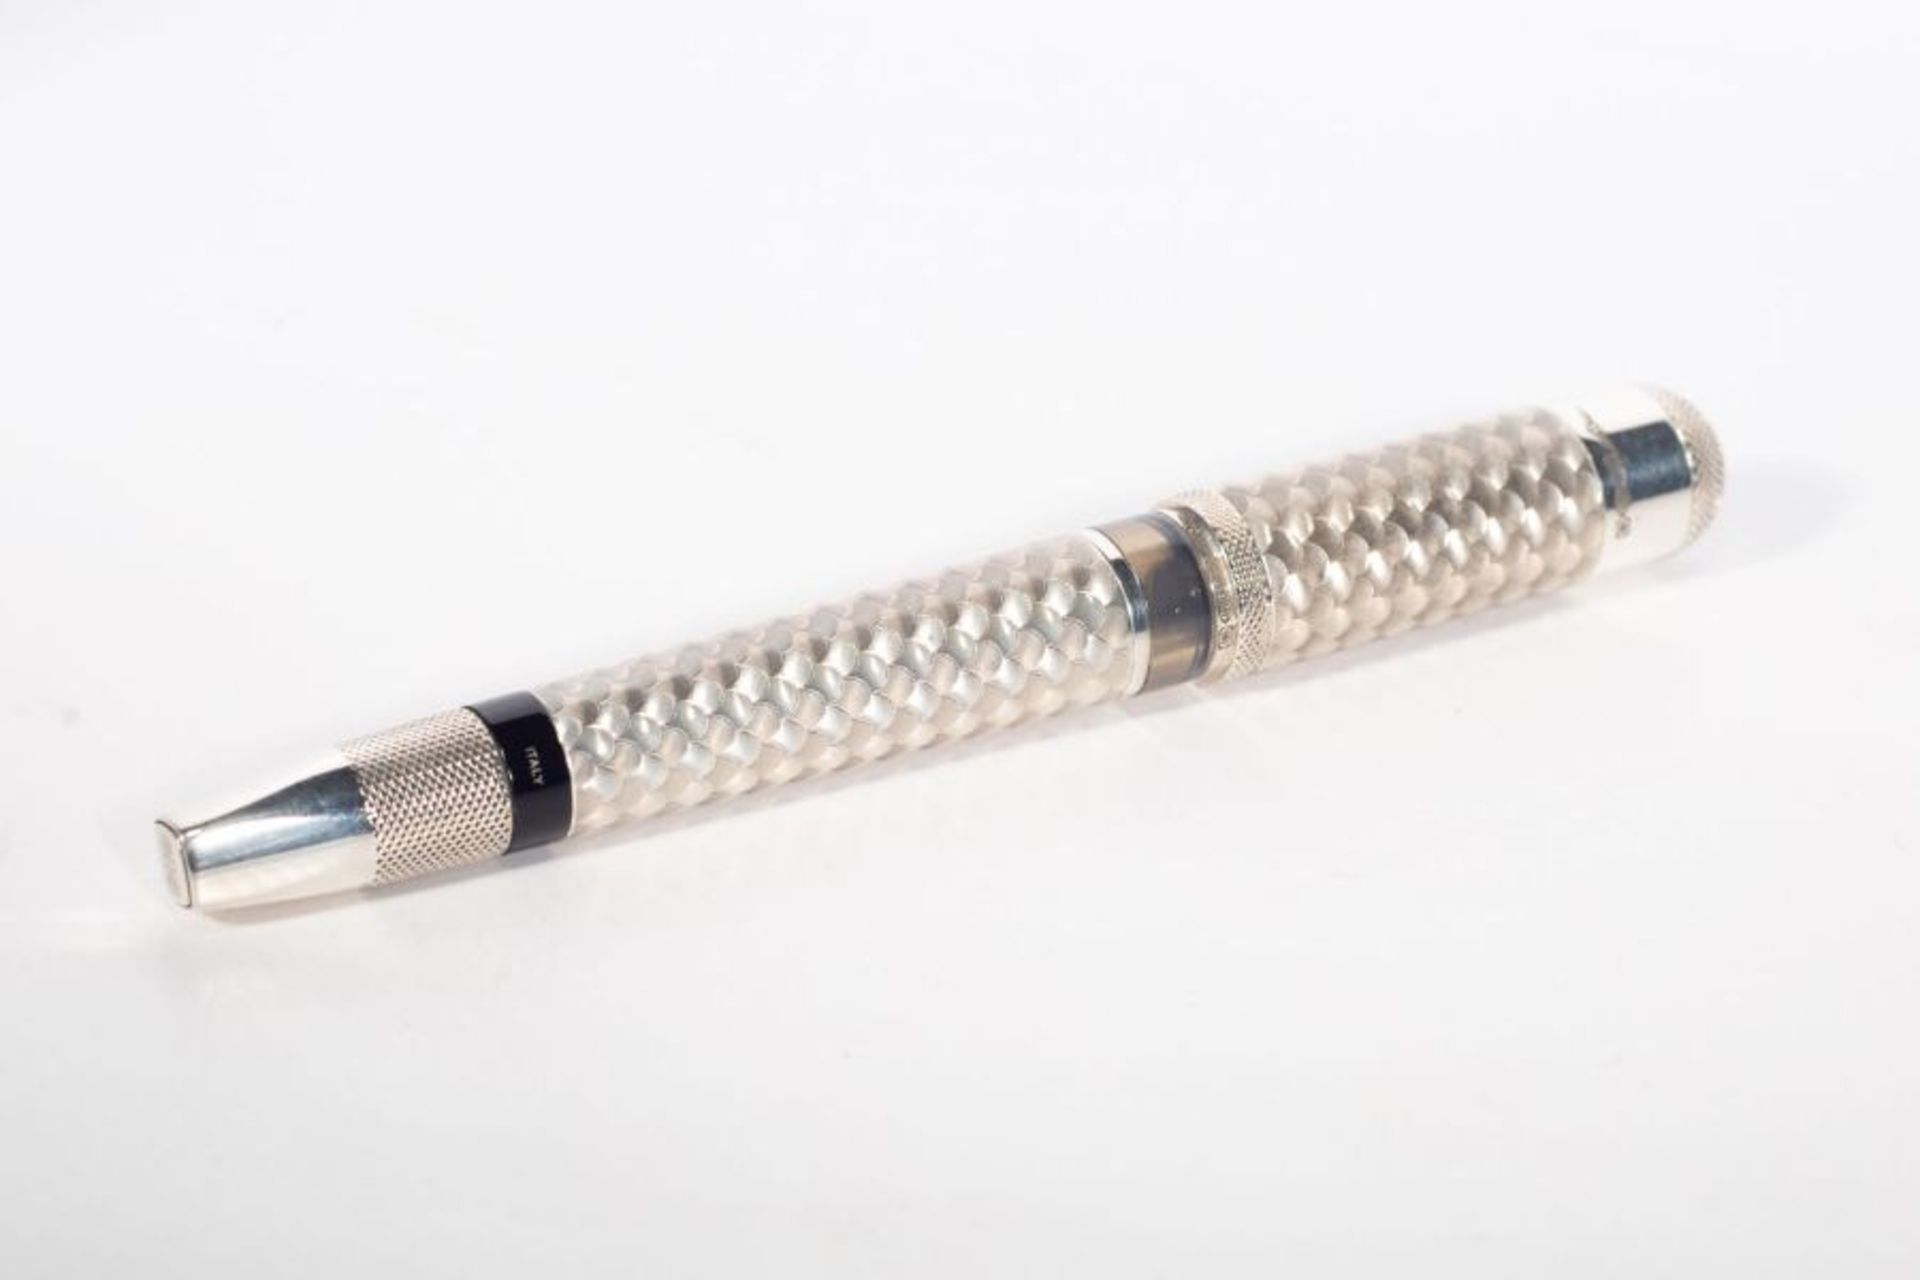 A Tibaldi for Bentley special edition Sterling silver fountain pen to commemorate 60 years of - Image 10 of 14